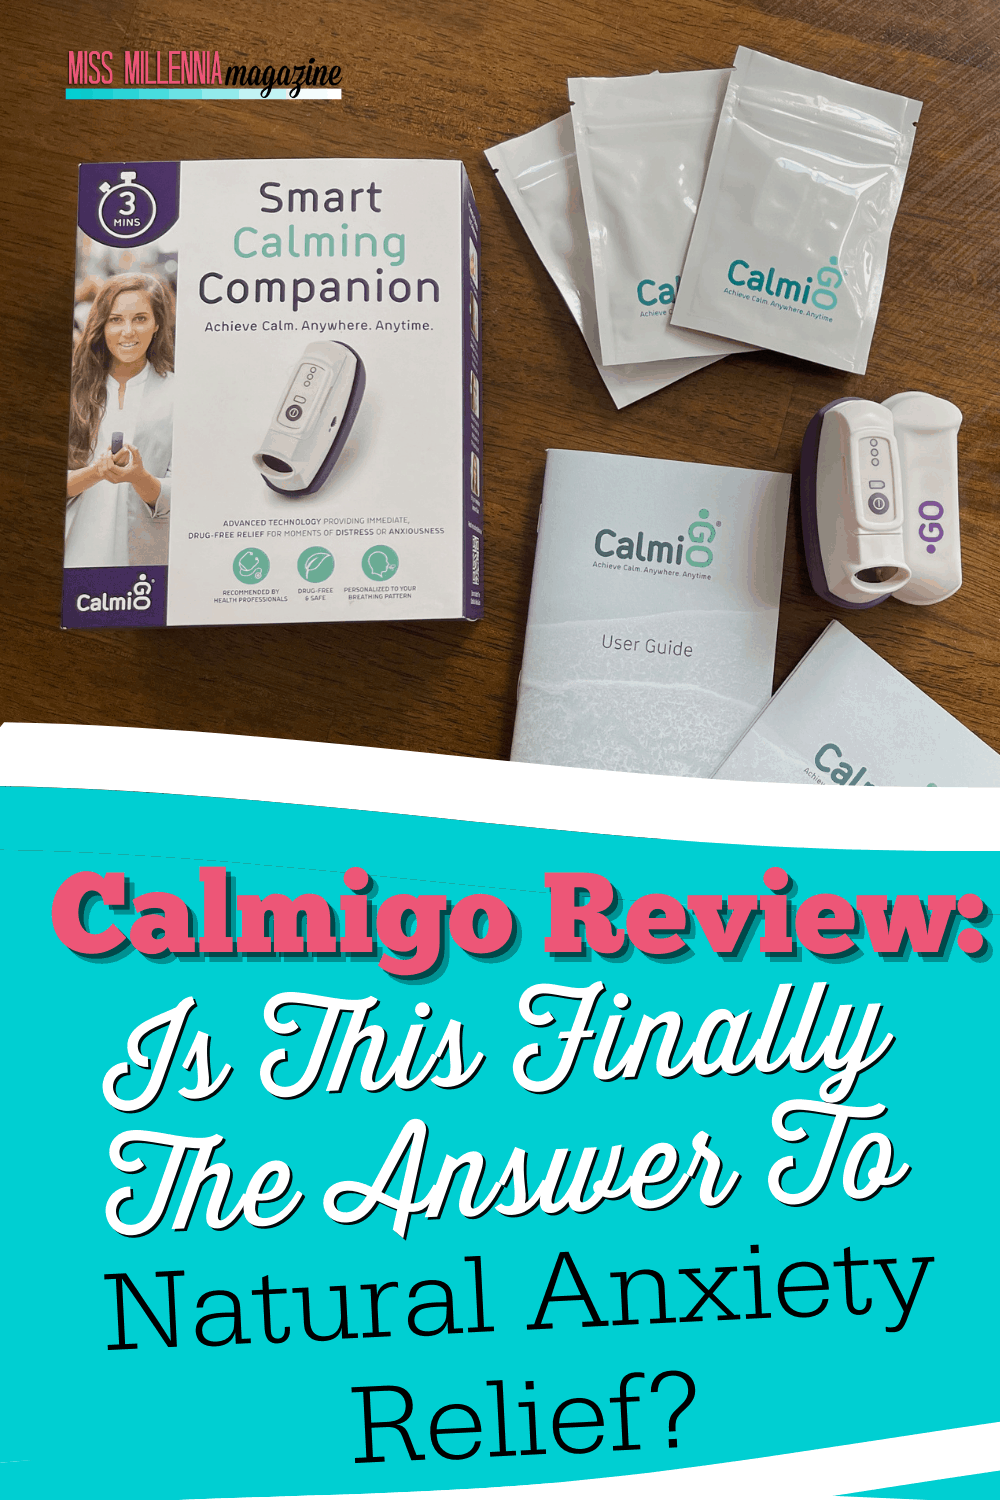 CalmiGo Review: Ultimate Secret To Your Natural Anxiety Relief